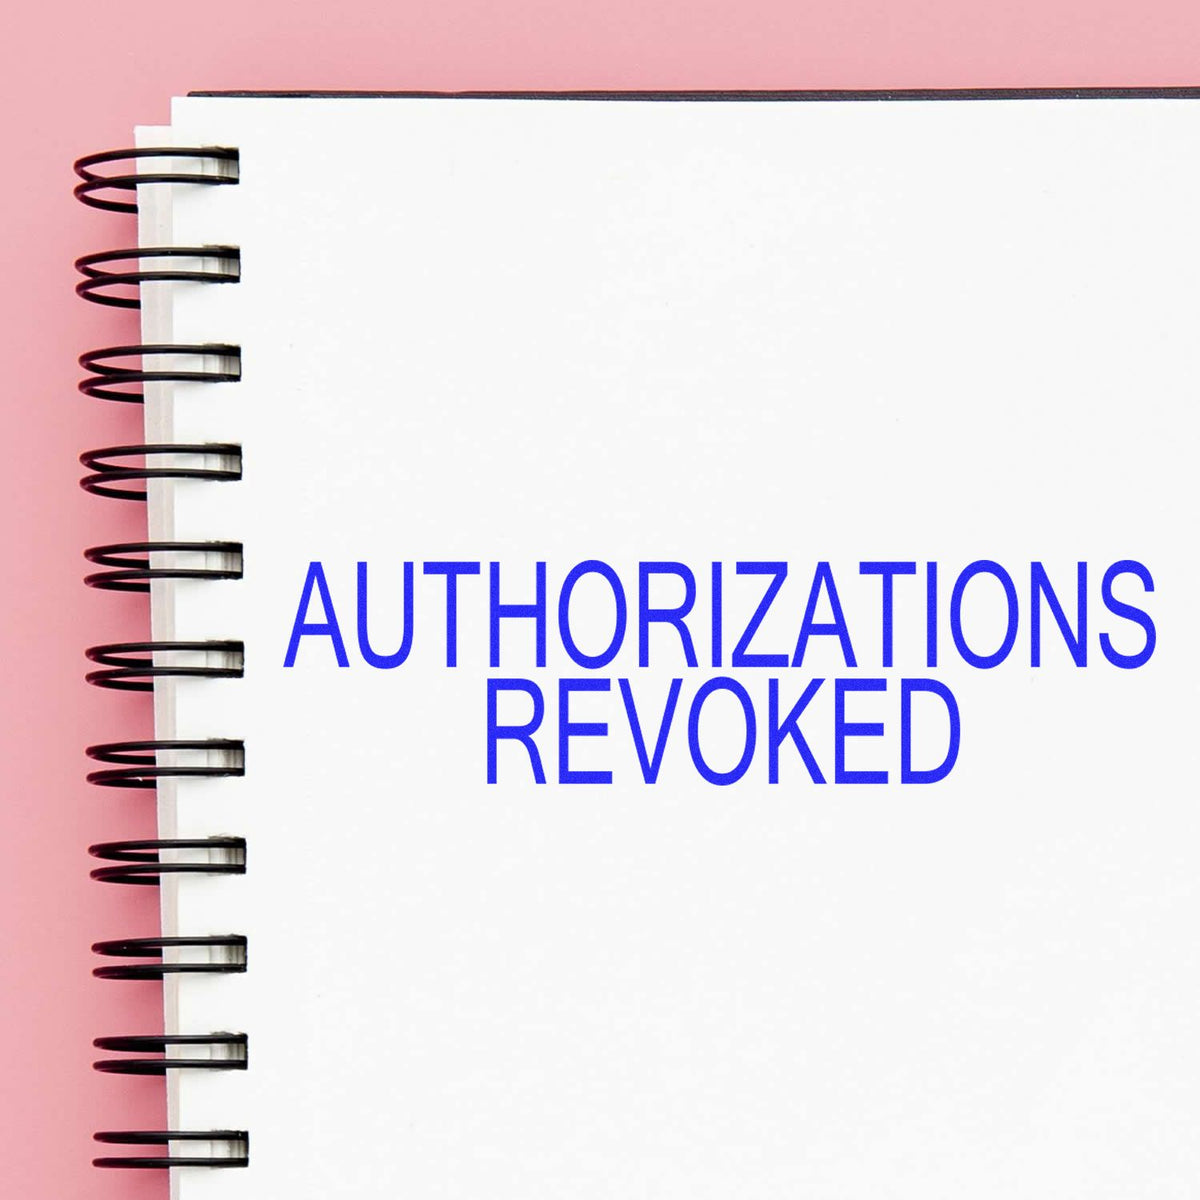 Large Authorizations Revoked Rubber Stamp In Use Photo